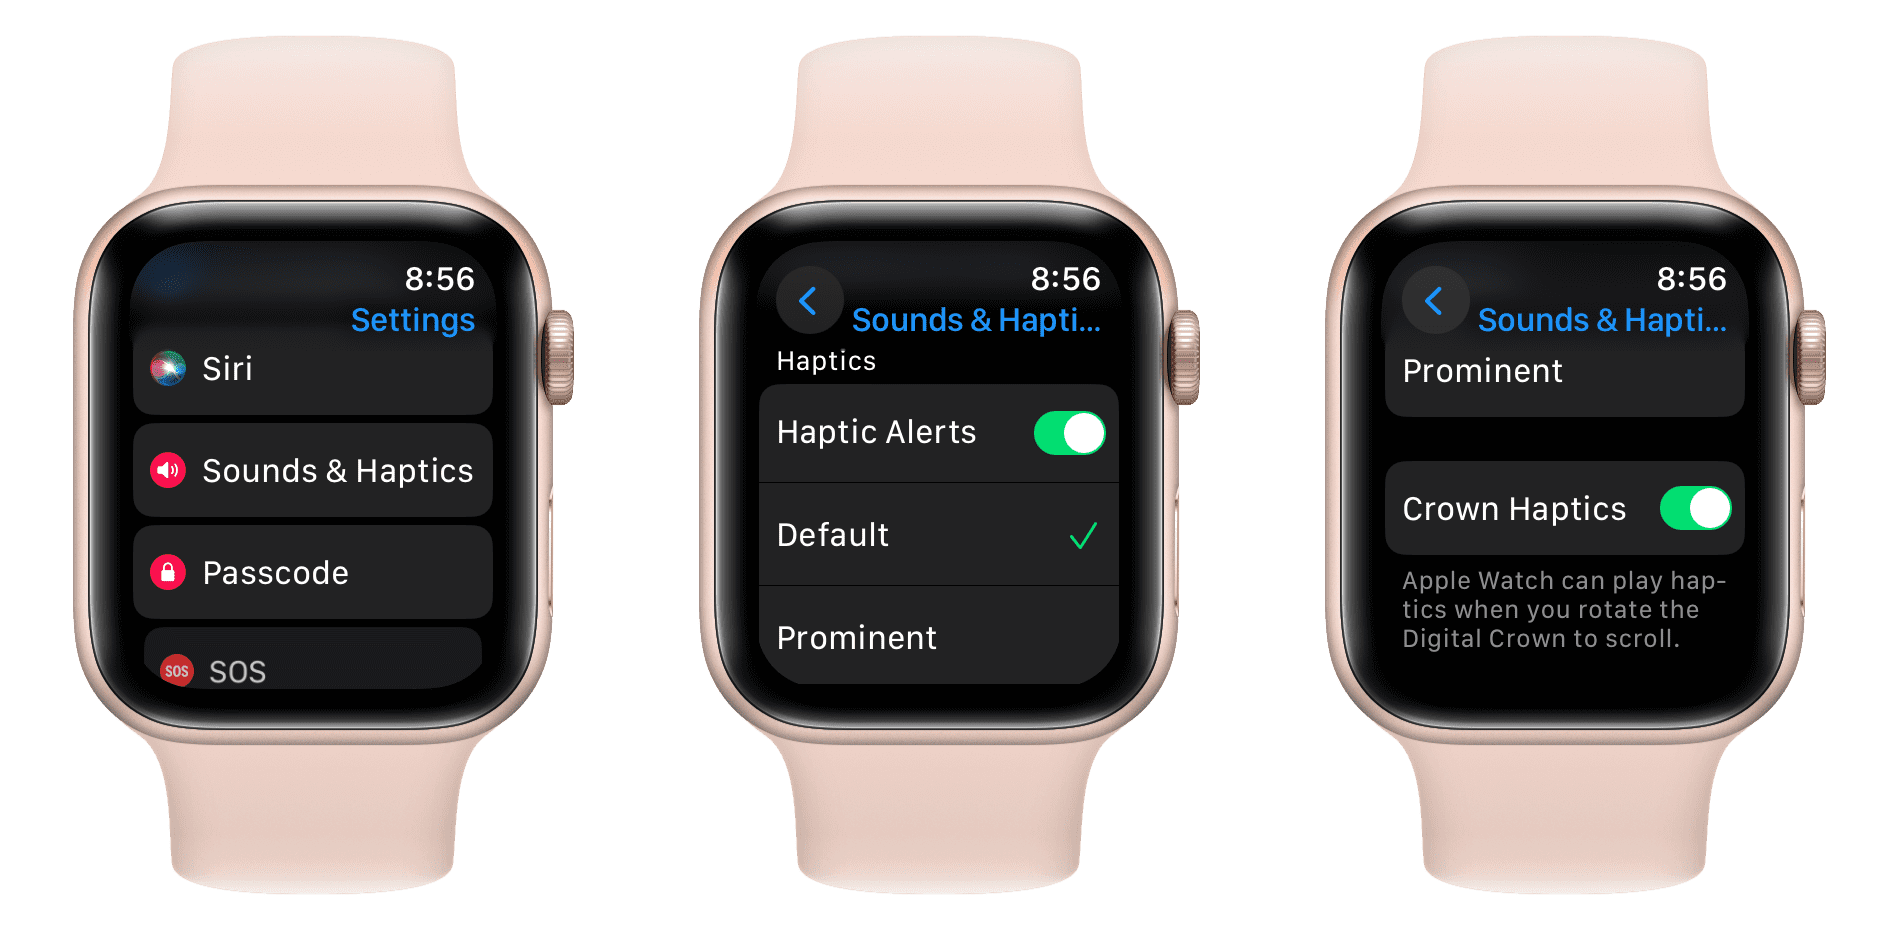 Haptic Alerts and Crown Haptics in Apple Watch sound settings